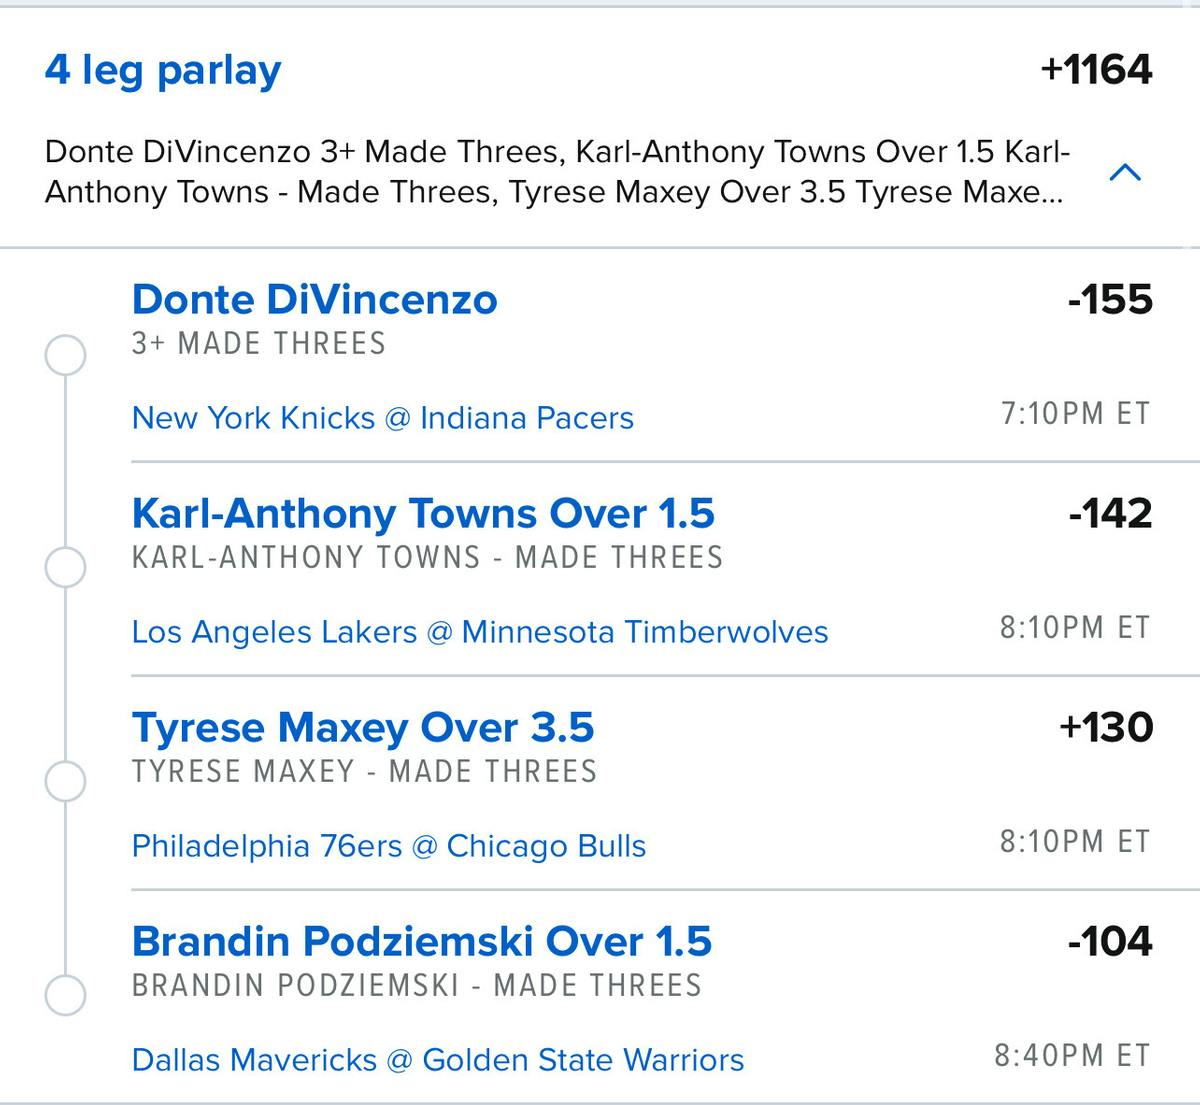 mcbets 3pm parlay